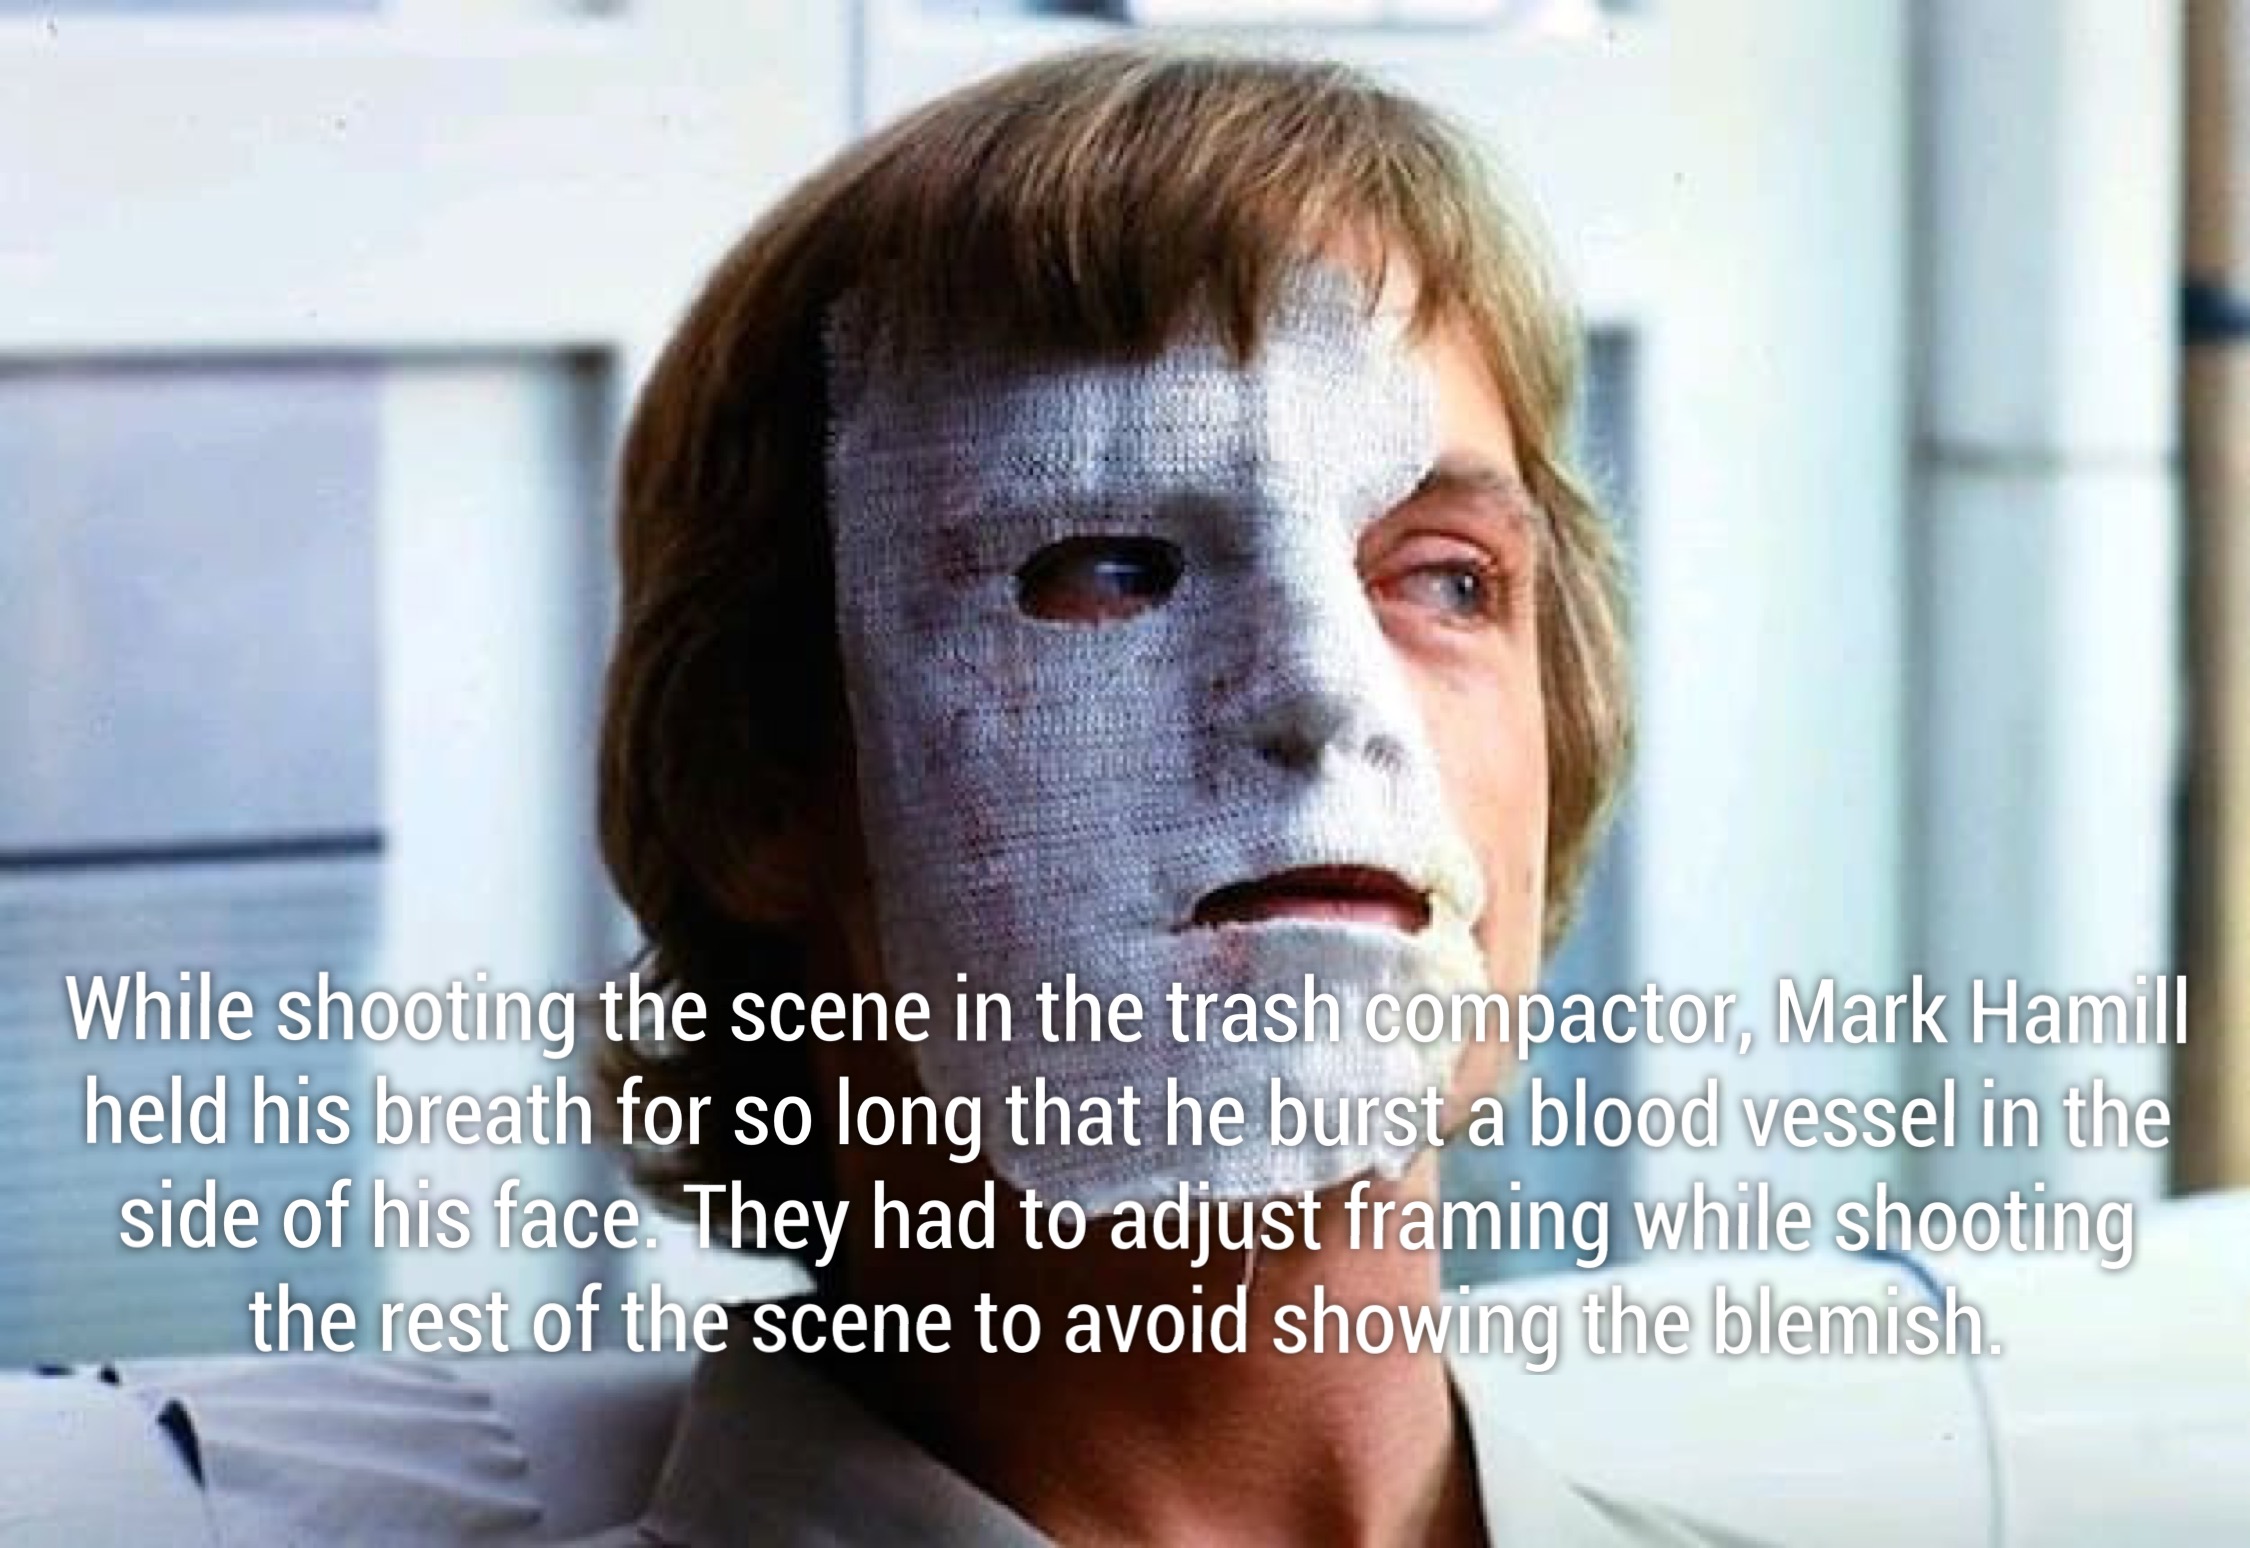 mark hamill before accident - While shooting the scene in the trash compactor, Mark Hamill held his breath for so long that he burst a blood vessel in the side of his face. They had to adjust framing while shooting the rest of the scene to avoid showing t